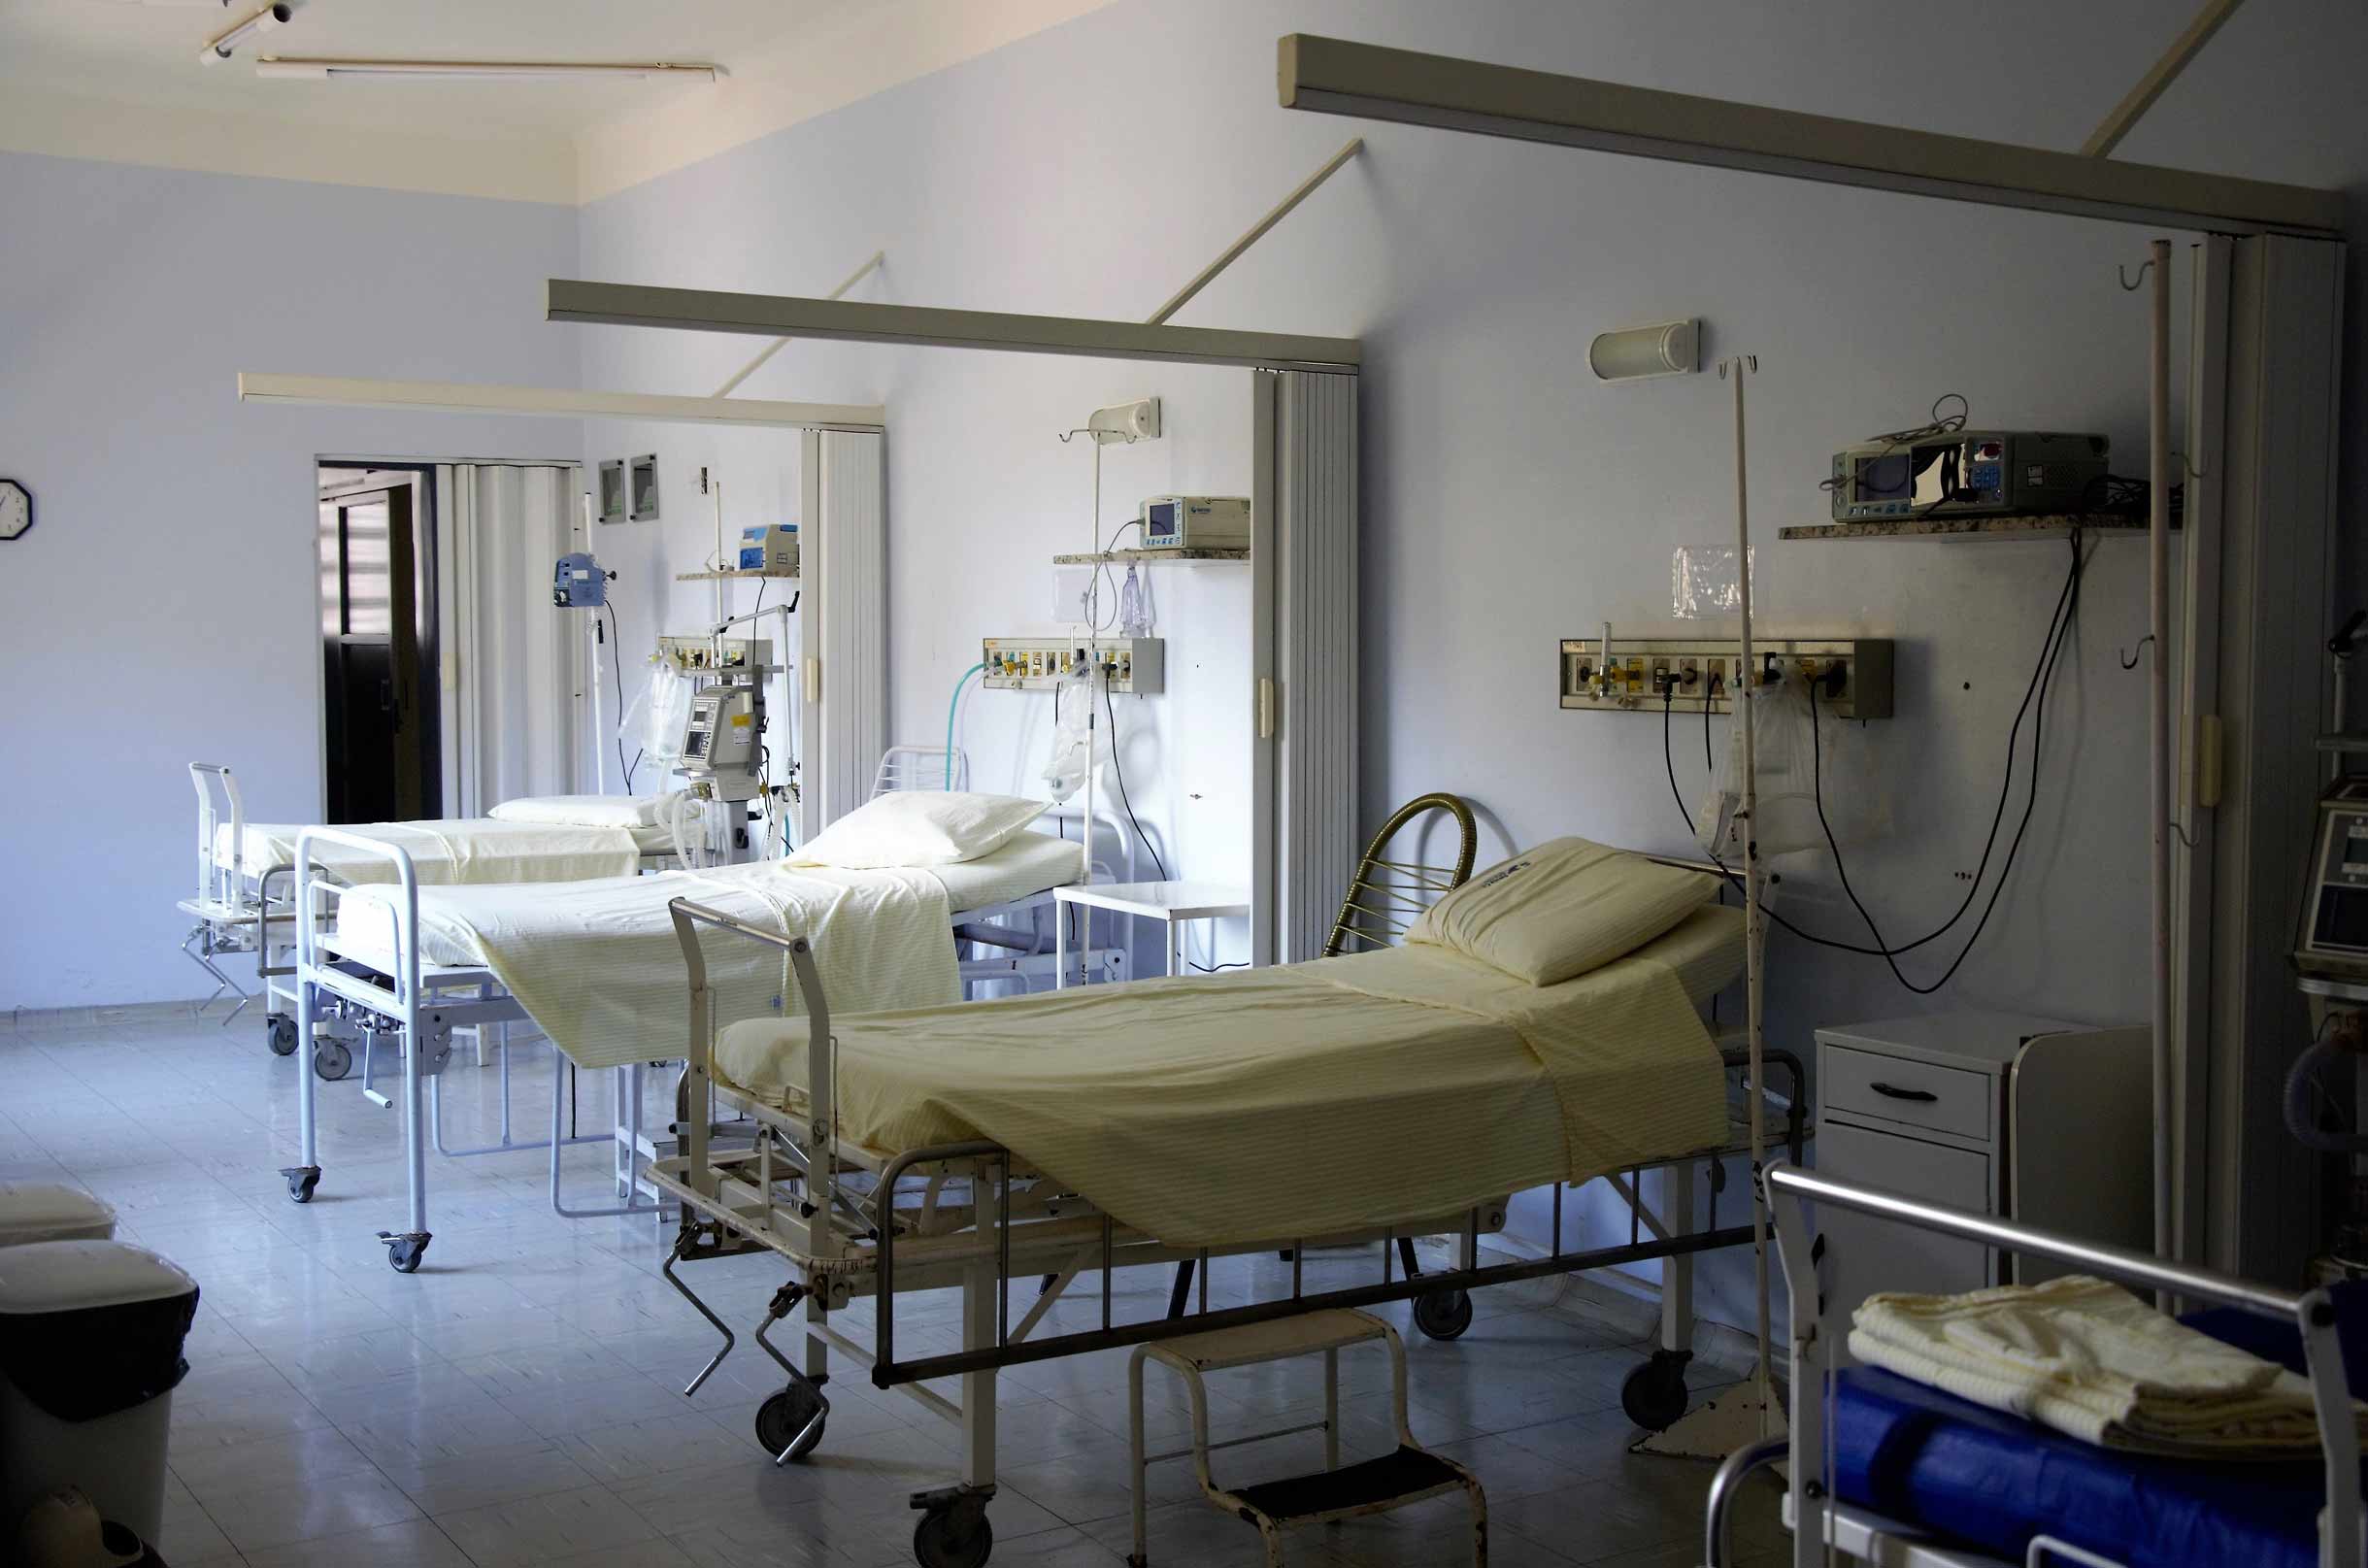 RFID lOT helps fine-tune in-hospital monitoring of medical waste